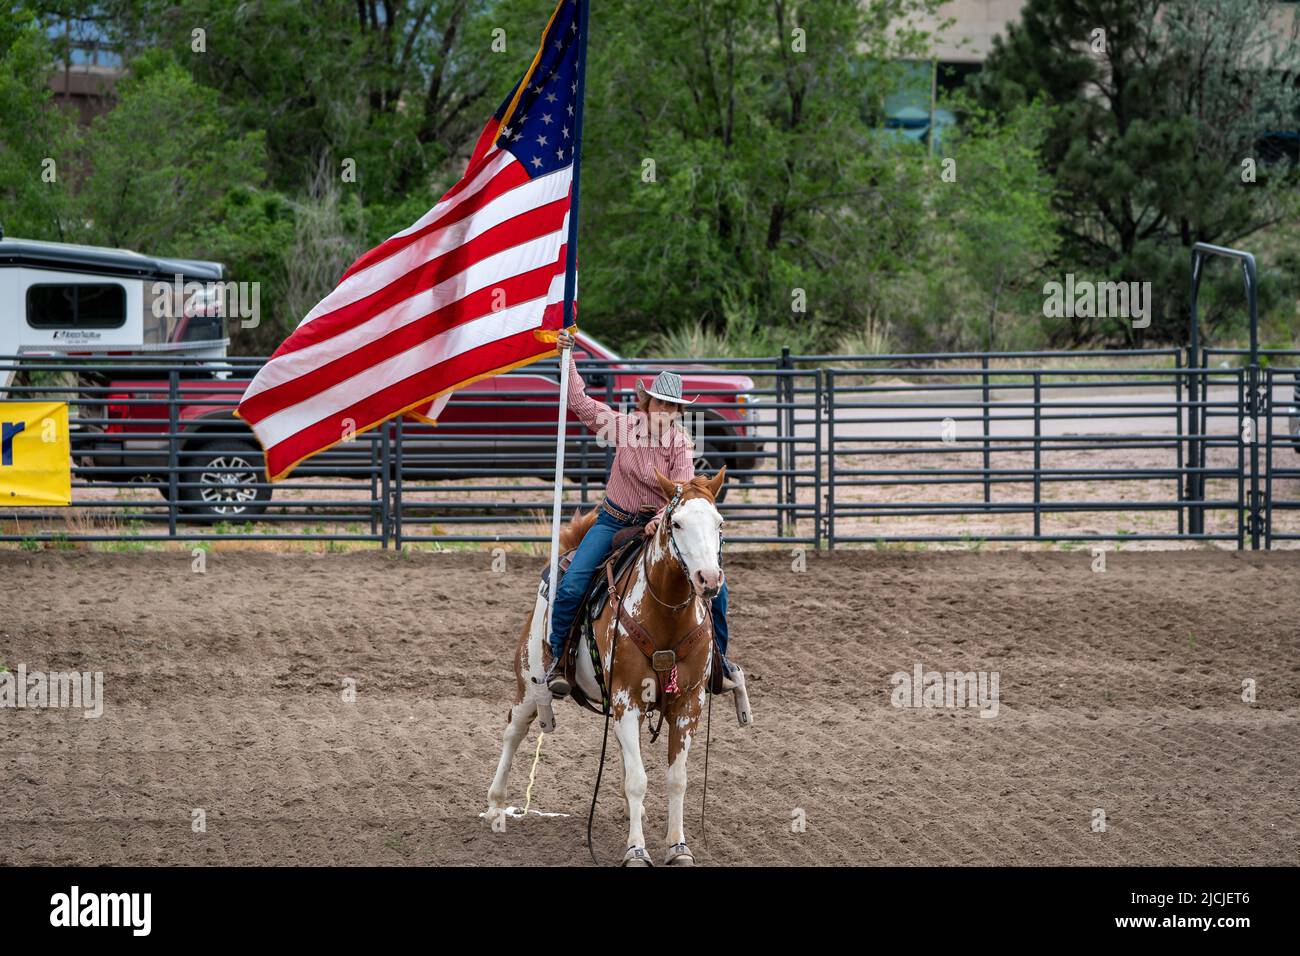 Rodeo in Colorado Springs, Colorado starts with the National Anthem and the U.S. Flag Stock Photo